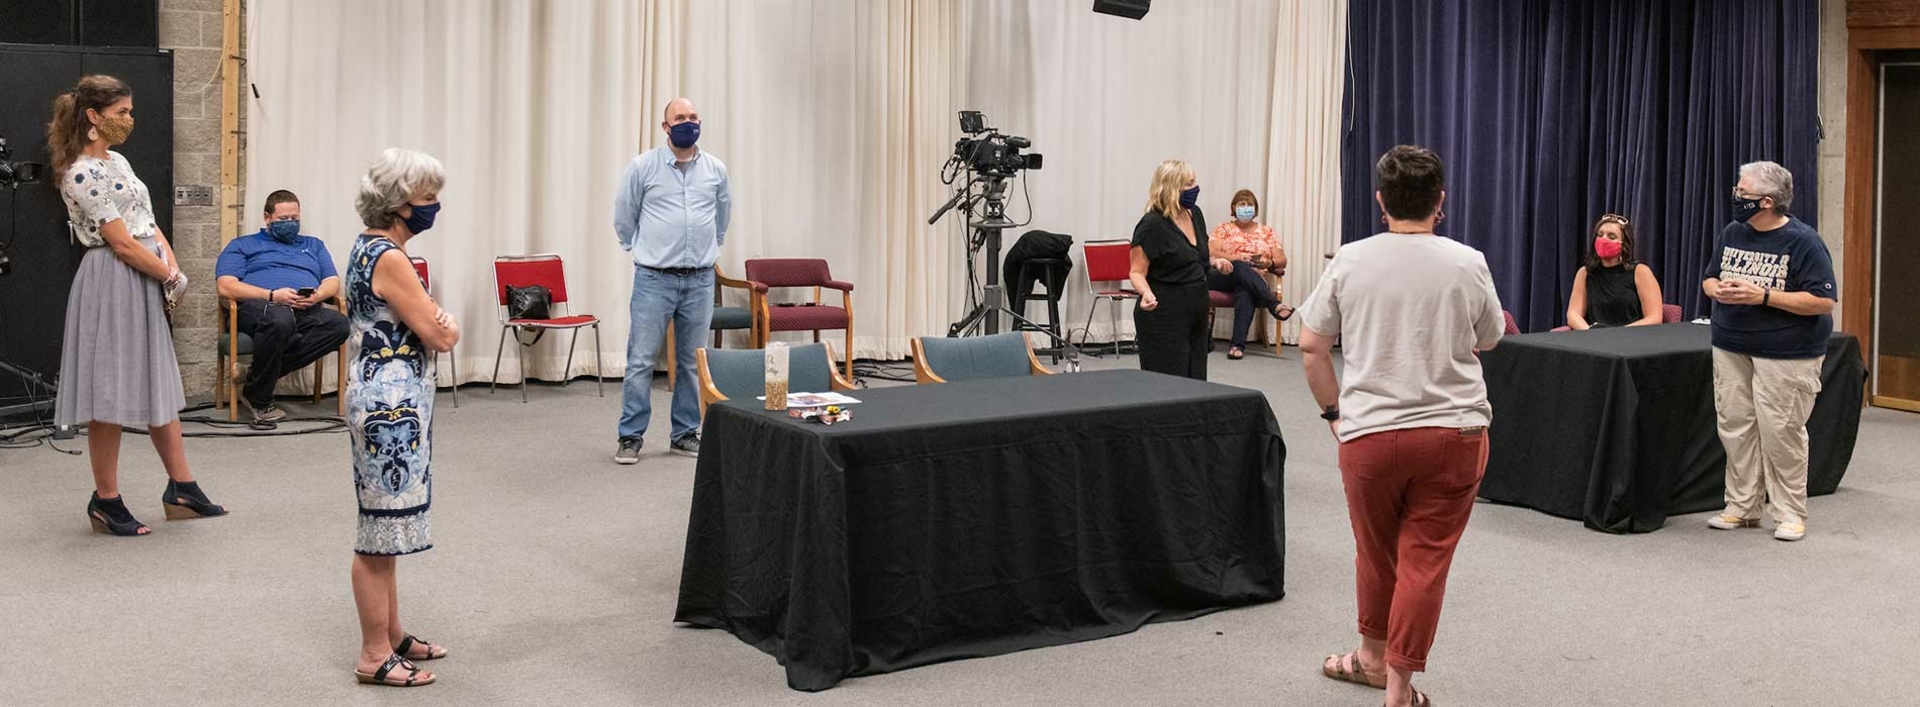 faculty preparing for an on-camera event